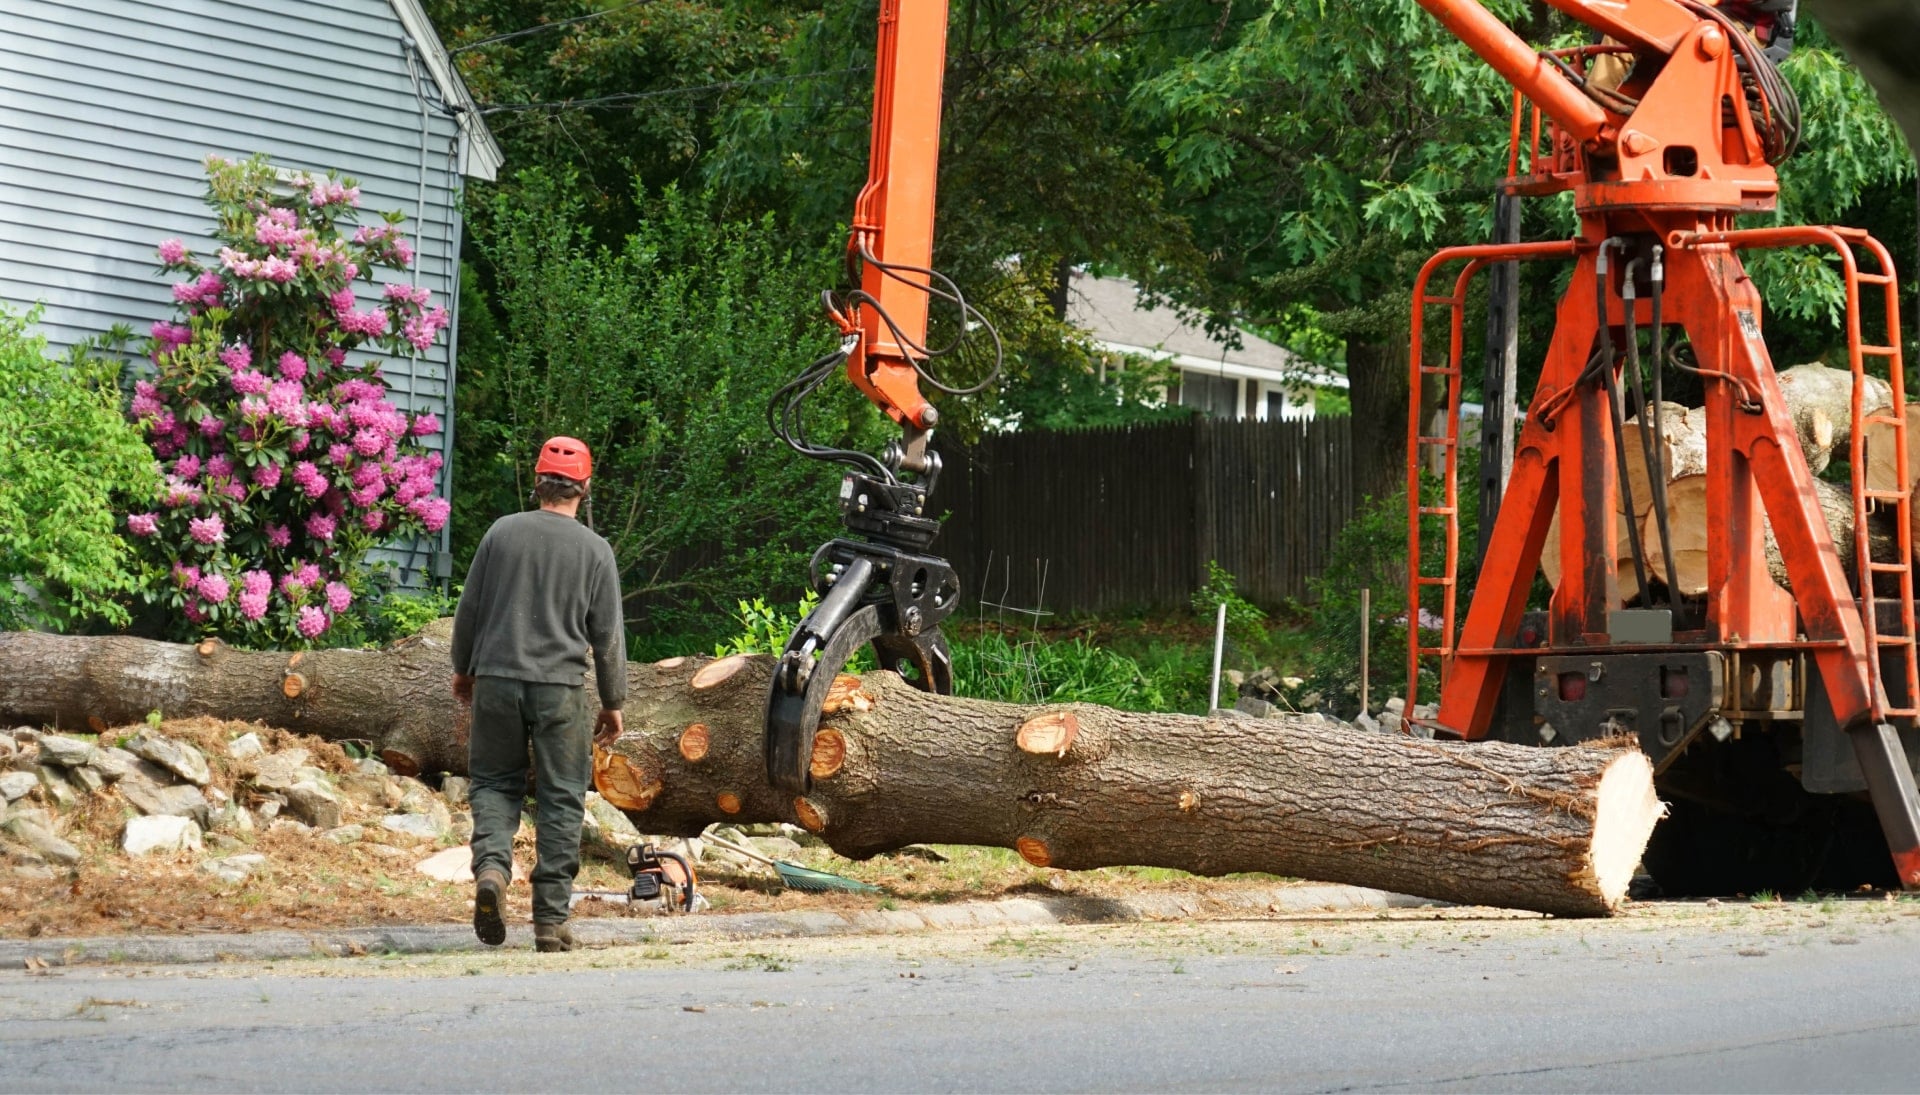 Local partner for Tree removal services in Annapolis